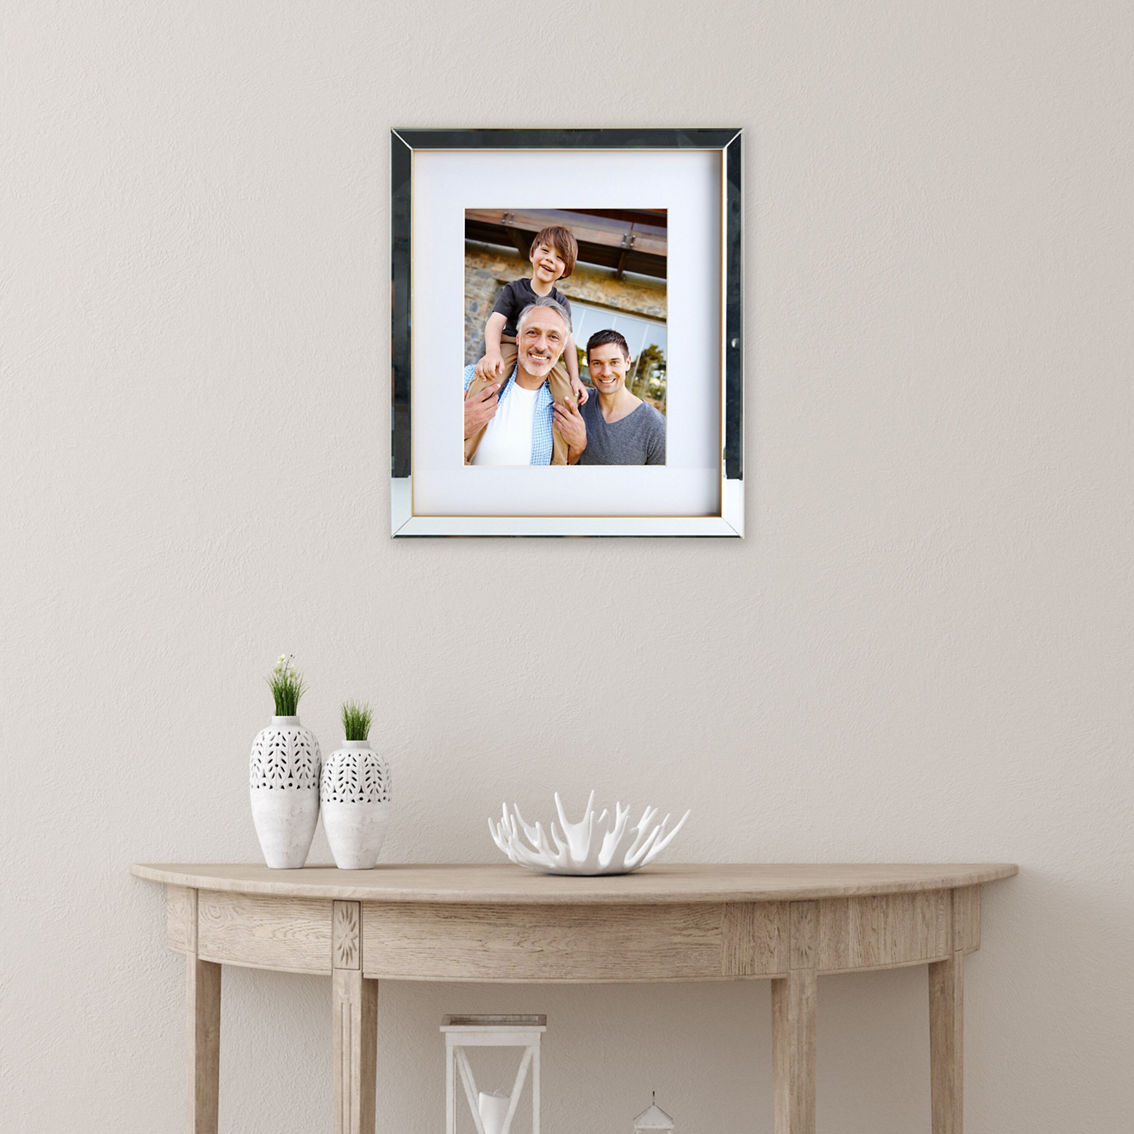 Mikasa Home 8 in. x 10 in. and 11 in. x 14 in. Mirror Gallery Frame with Gold Sides - Image 6 of 6